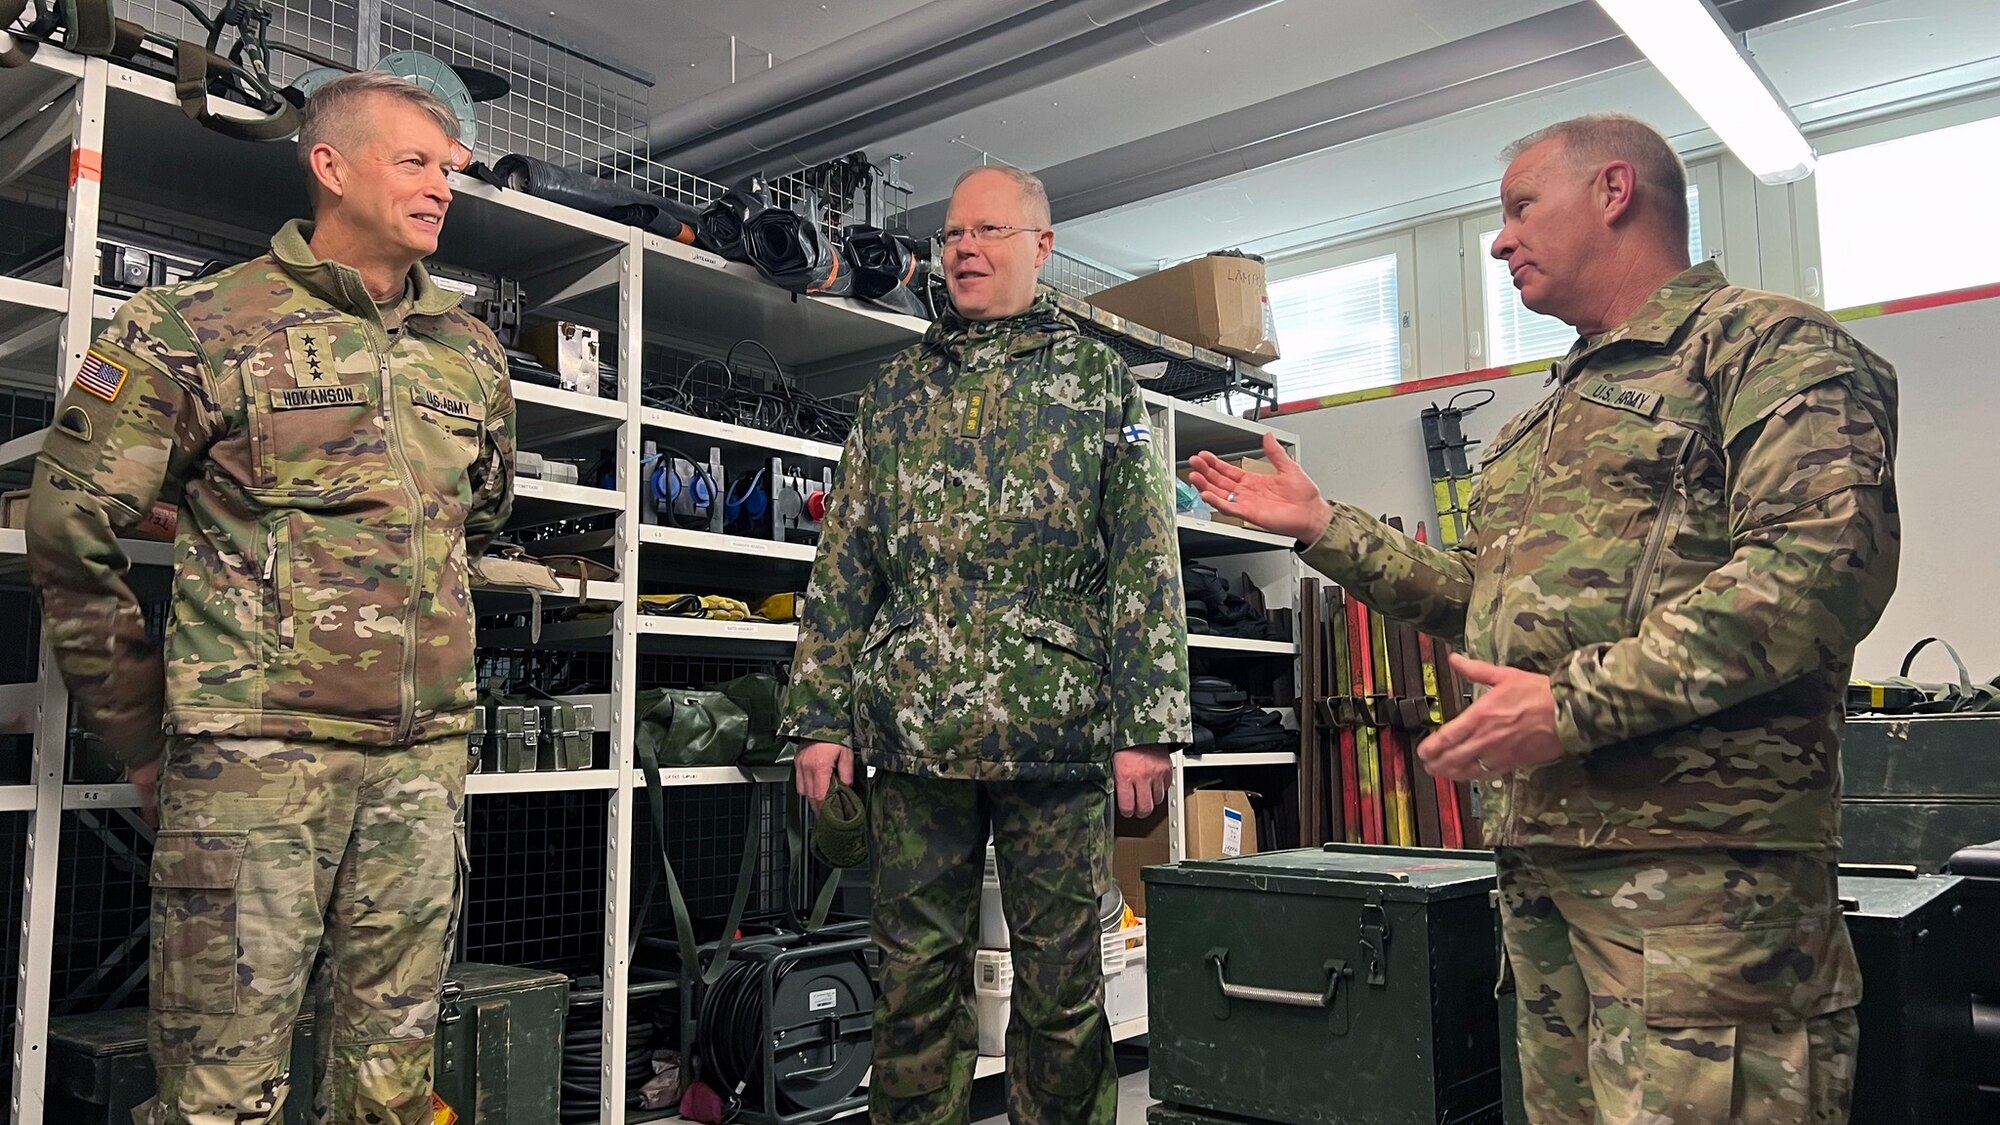 In Finland, Guard leaders look to enhance already strong ties